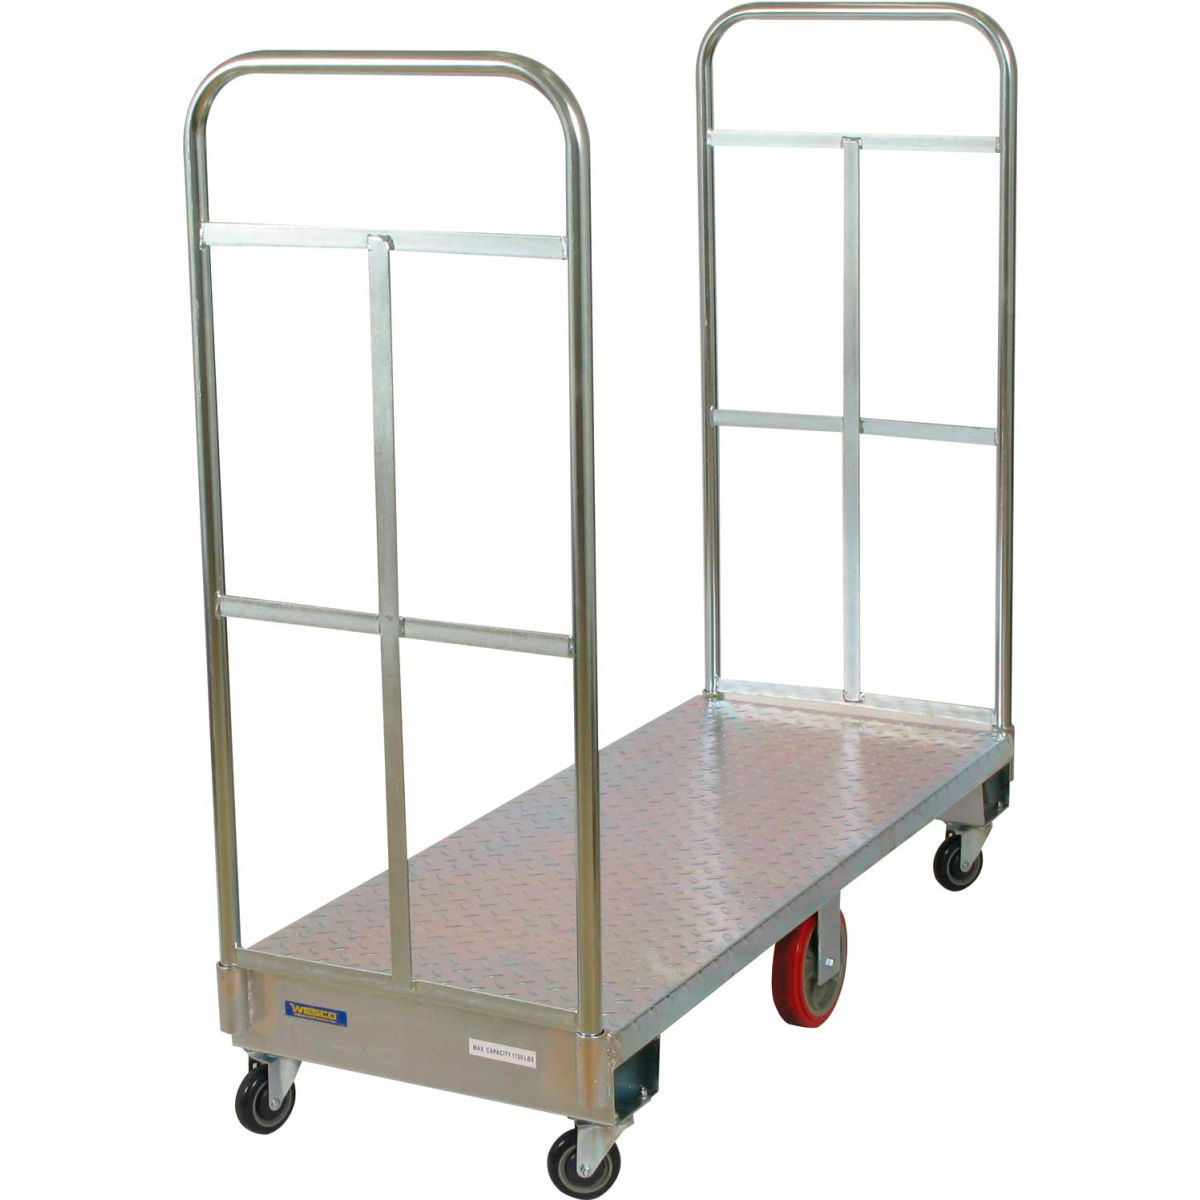 Wesco Industrial Products 6640500 1750 lbs 273295 Galvanized Steel Narrow Aisle Platform Truck - 60 x 24 in.